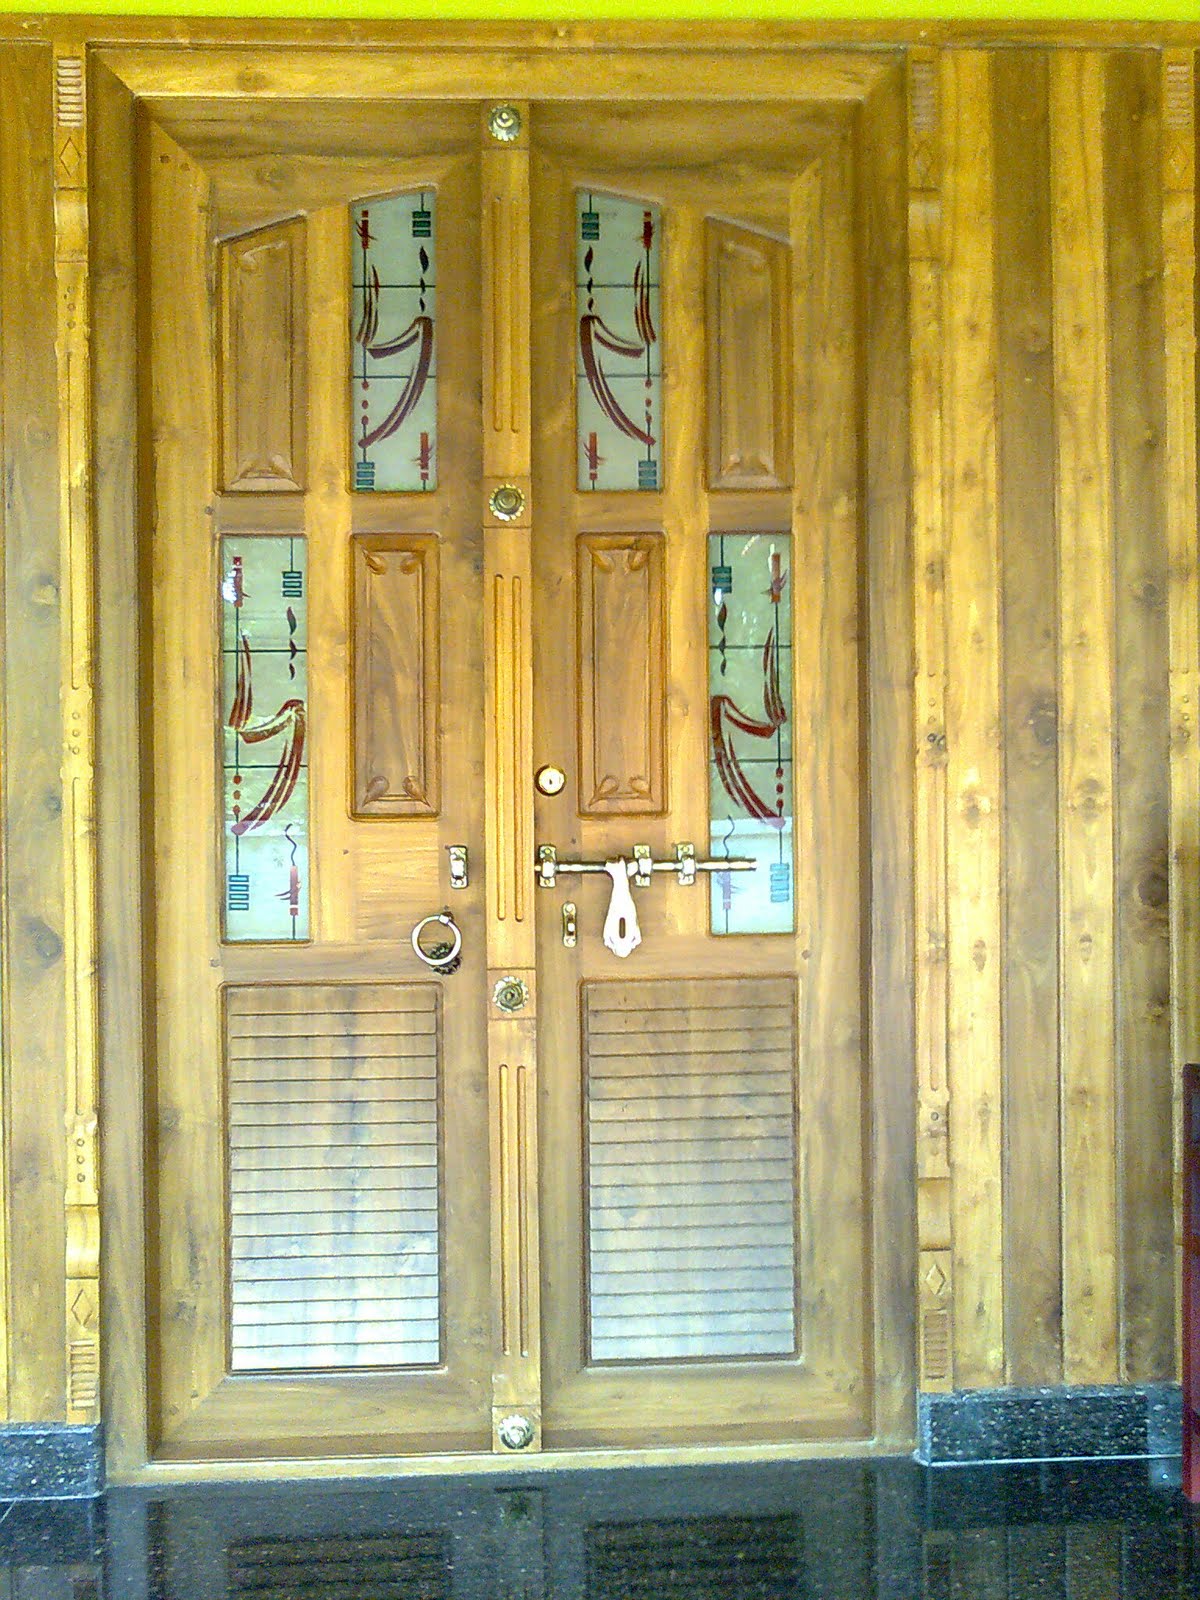 kerala-Interior Design,Decorations and Wood Works: FRONT PANEL DOORS